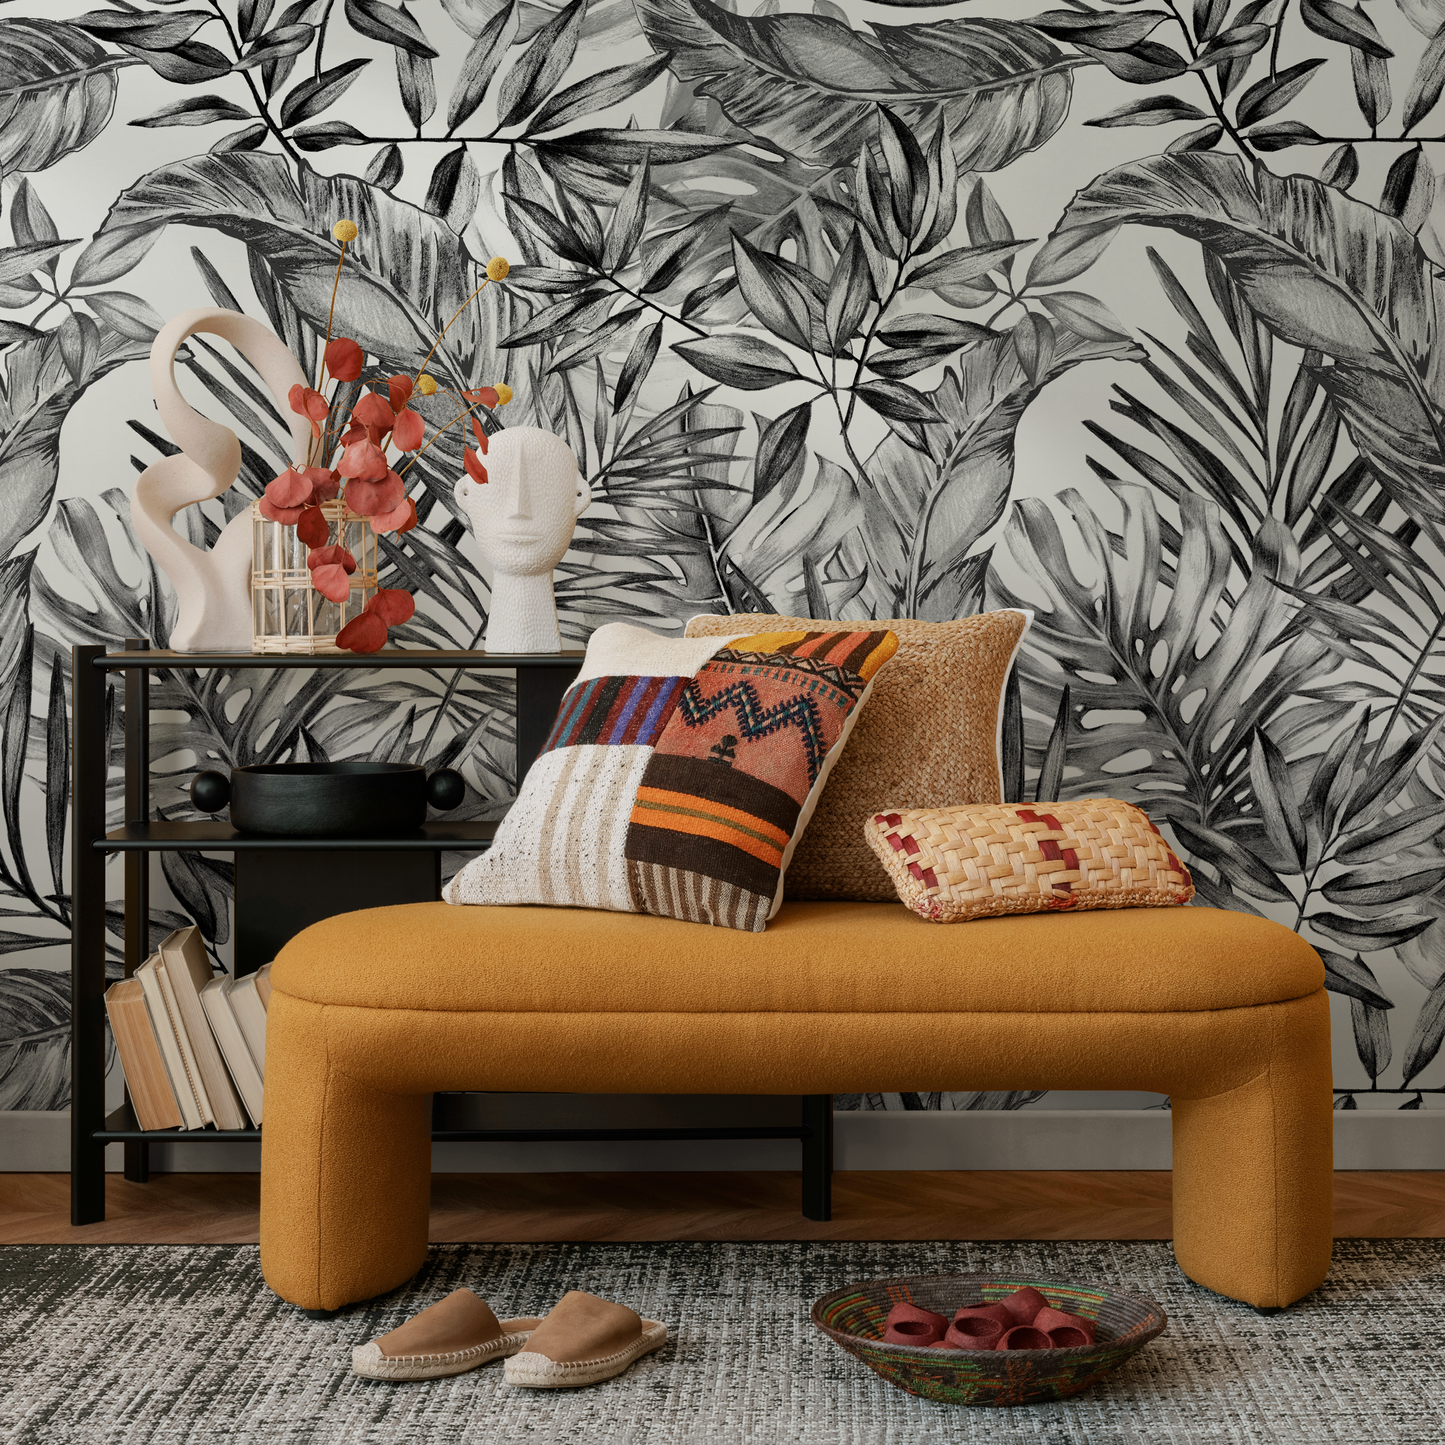 Wallpaper Peel and Stick Wallpaper Removable Wallpaper Home Room Decor / Black and White Monstera Wallpaper Tropical Jungle Wallpaper - A277